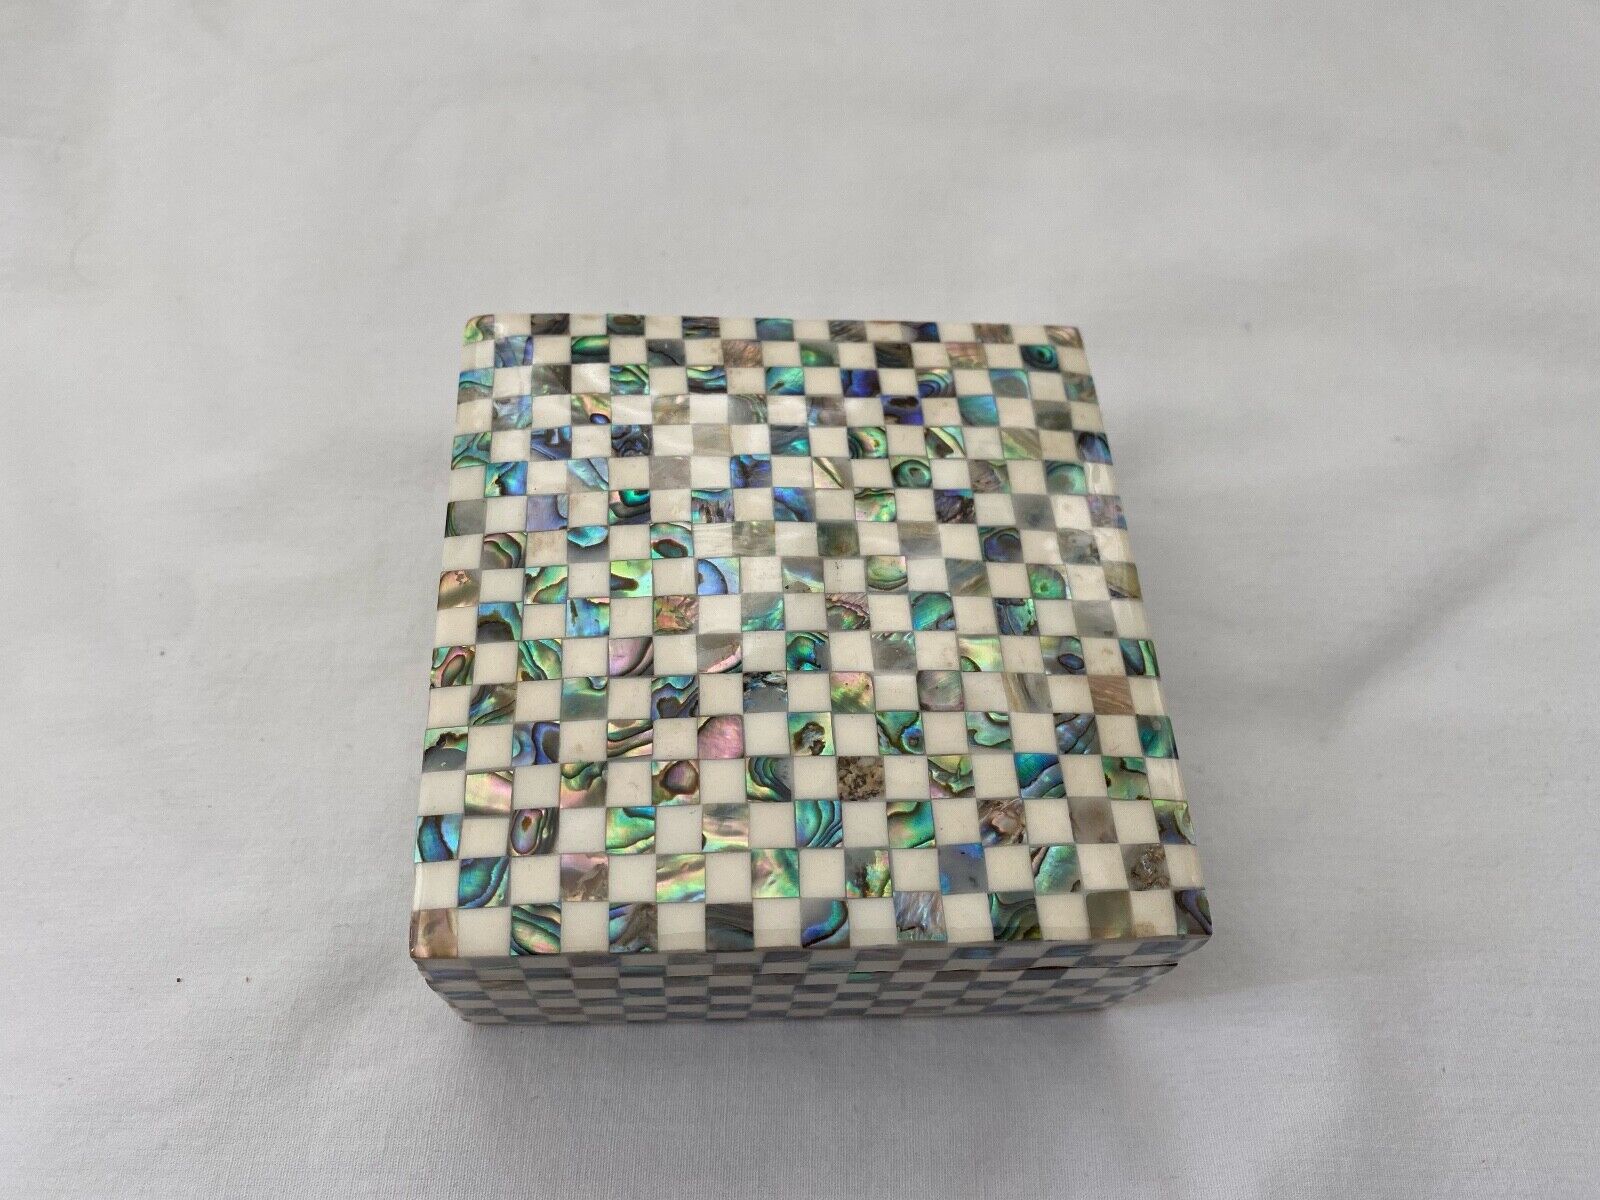 Egyptian Inlaid Mother of Pearl Paua Handmade Square Jewelry Box 3.75\